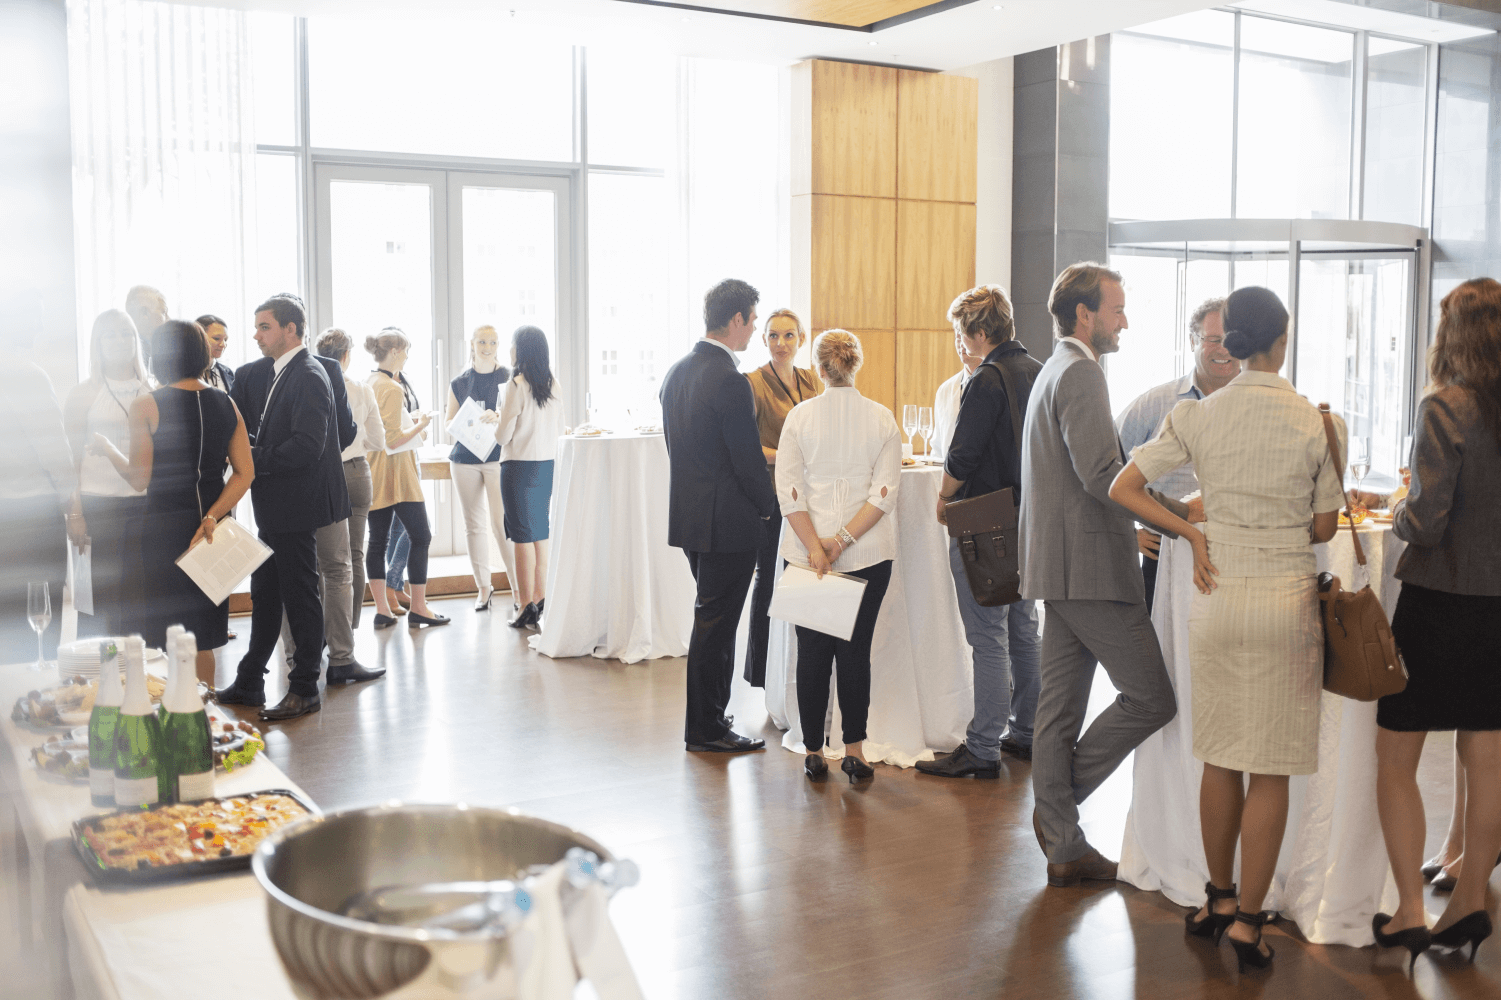 People networking at a reception party